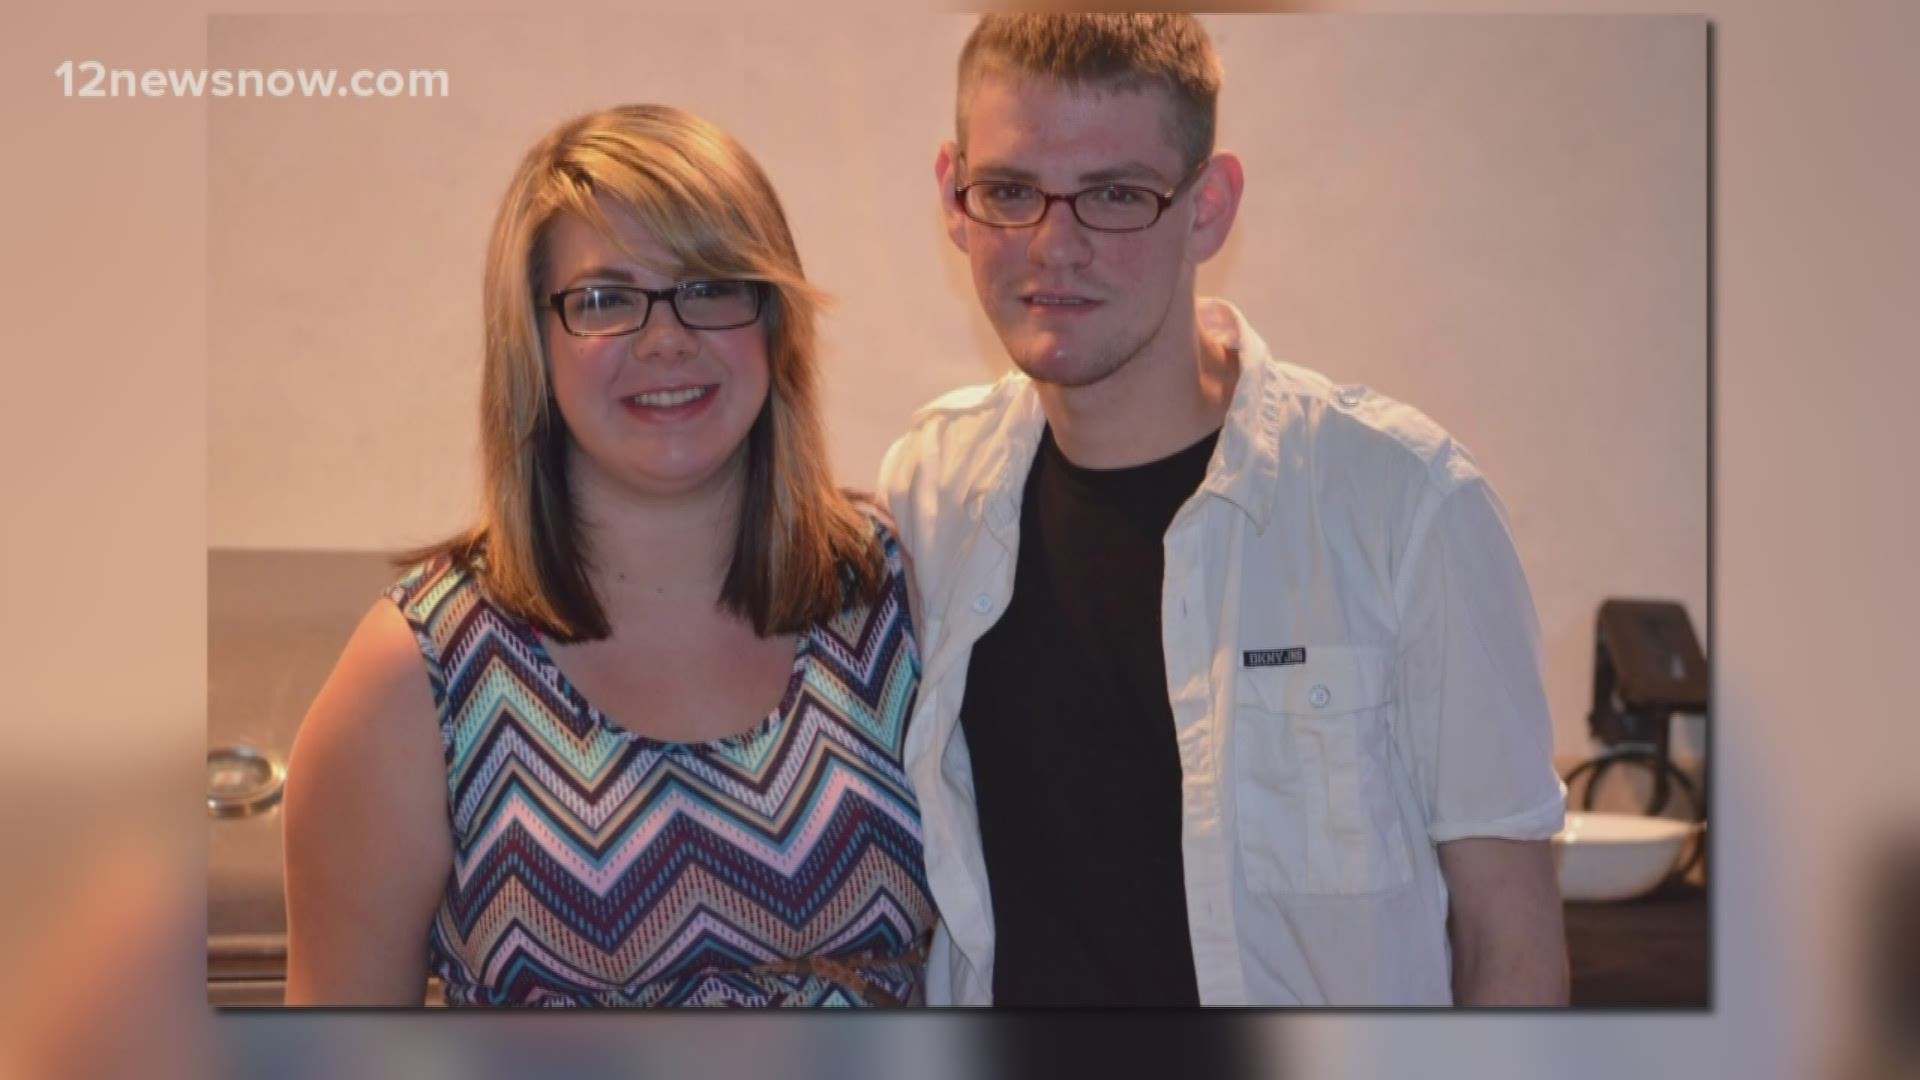 The family of Joshua Teague is devastated over Joshua's death